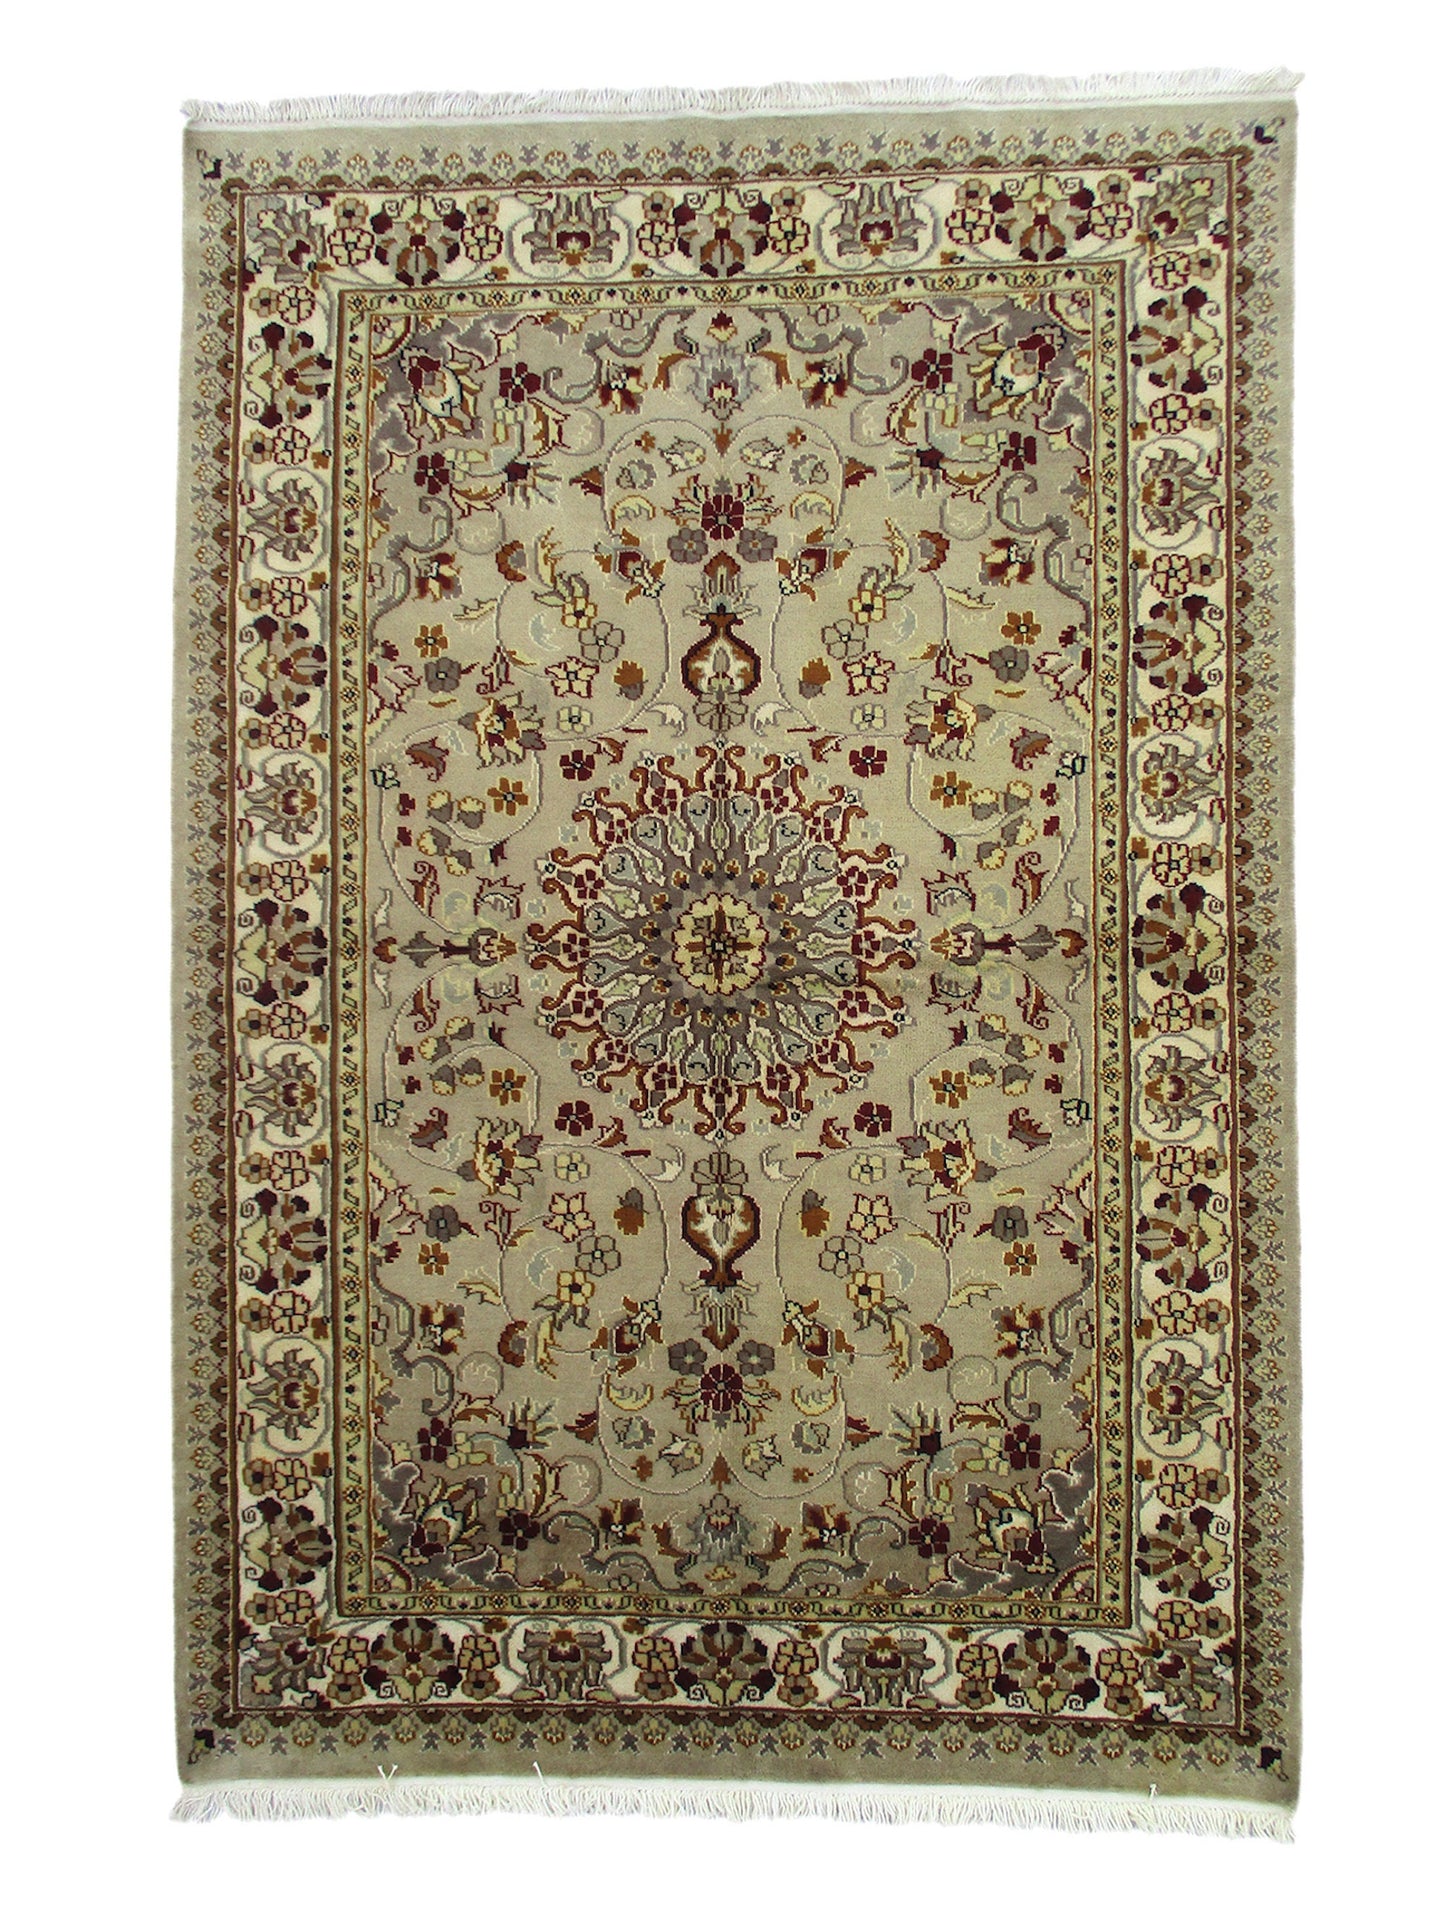 Beige Grey 4x6 Oriental Hand Knotted Rug | Medallion Rug with Red Beige Accents | Wool Antique Floor Decor Rug